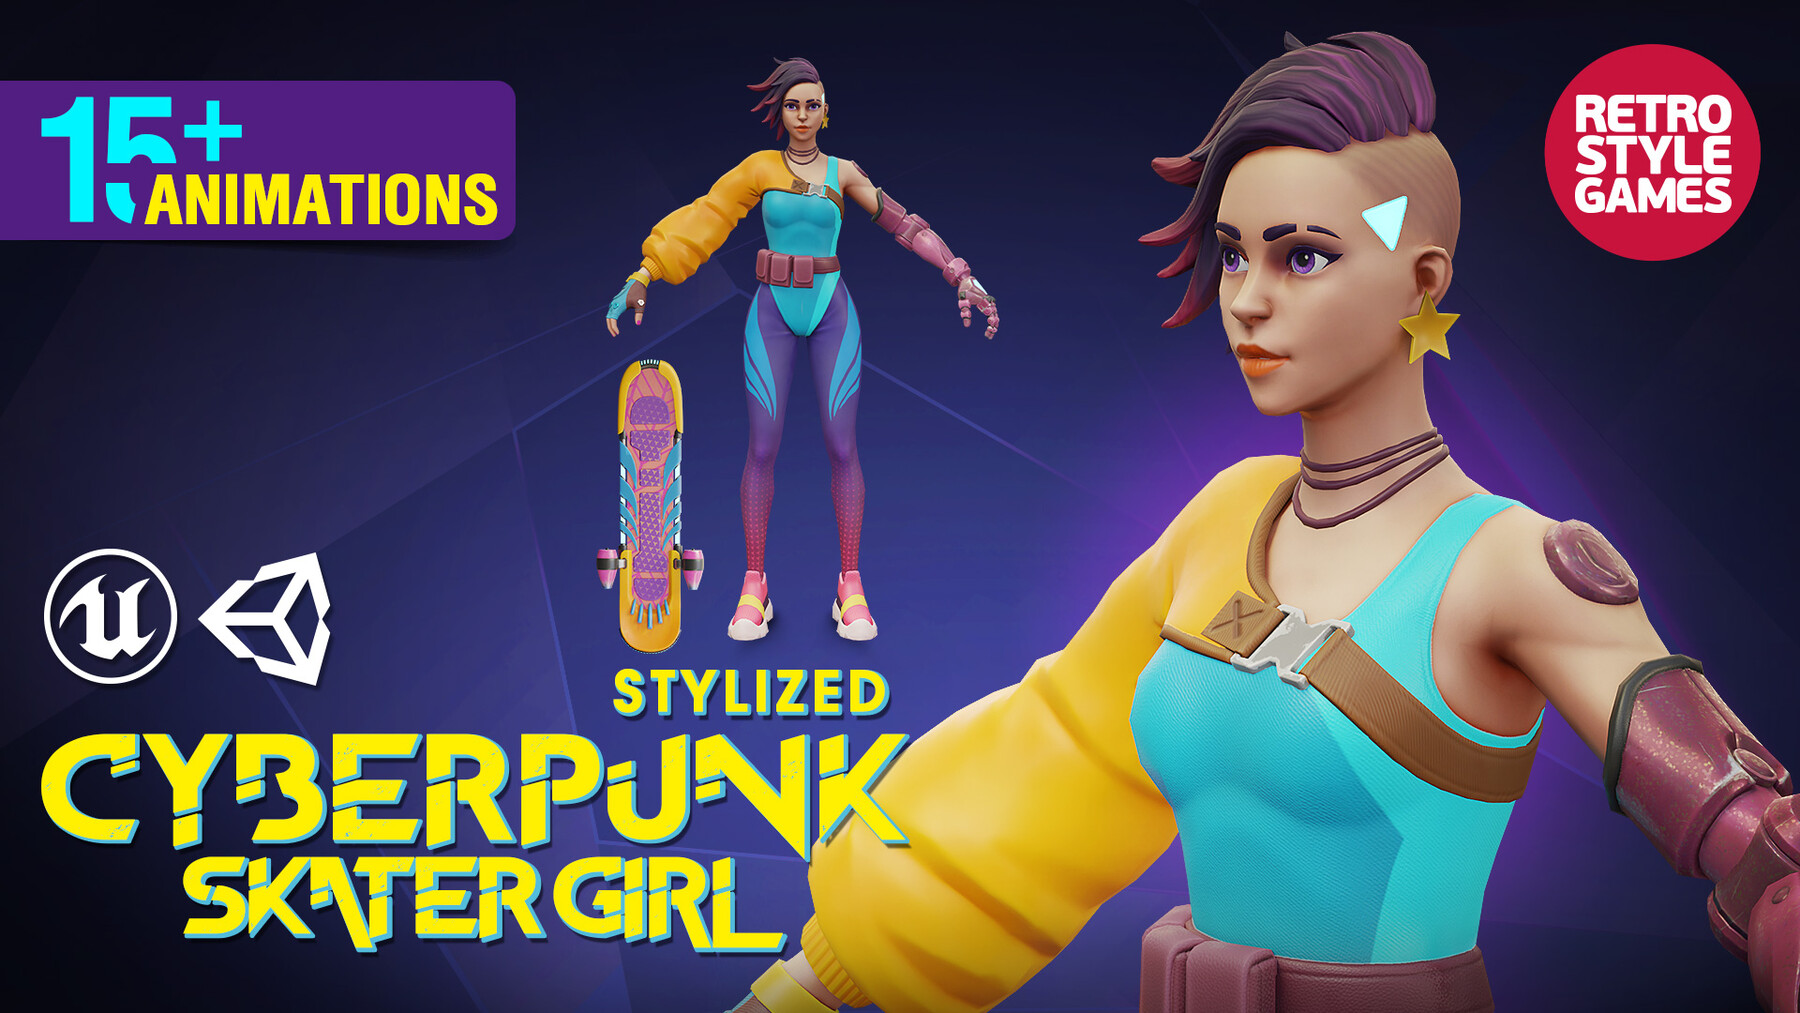 Stylized Cyberpunk Props and Animated Character in Props - UE Marketplace